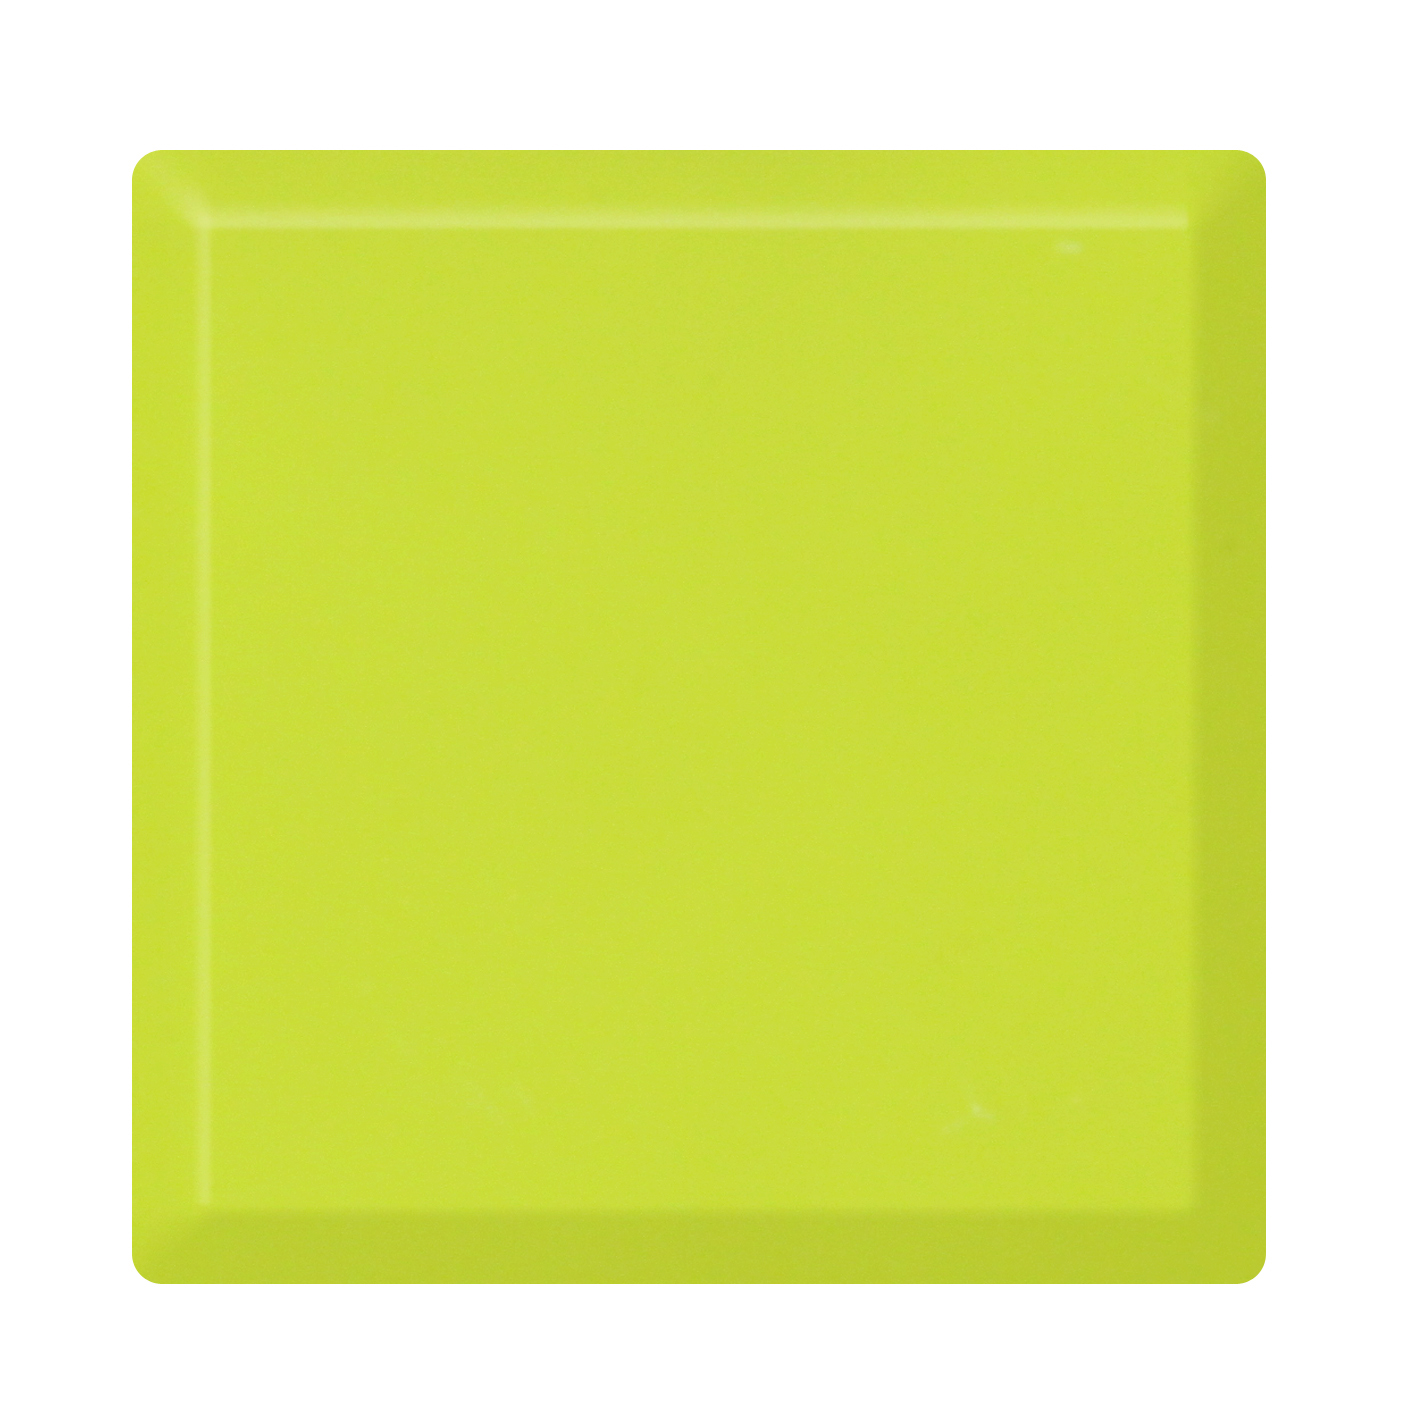 Light green color acrylic solid surface